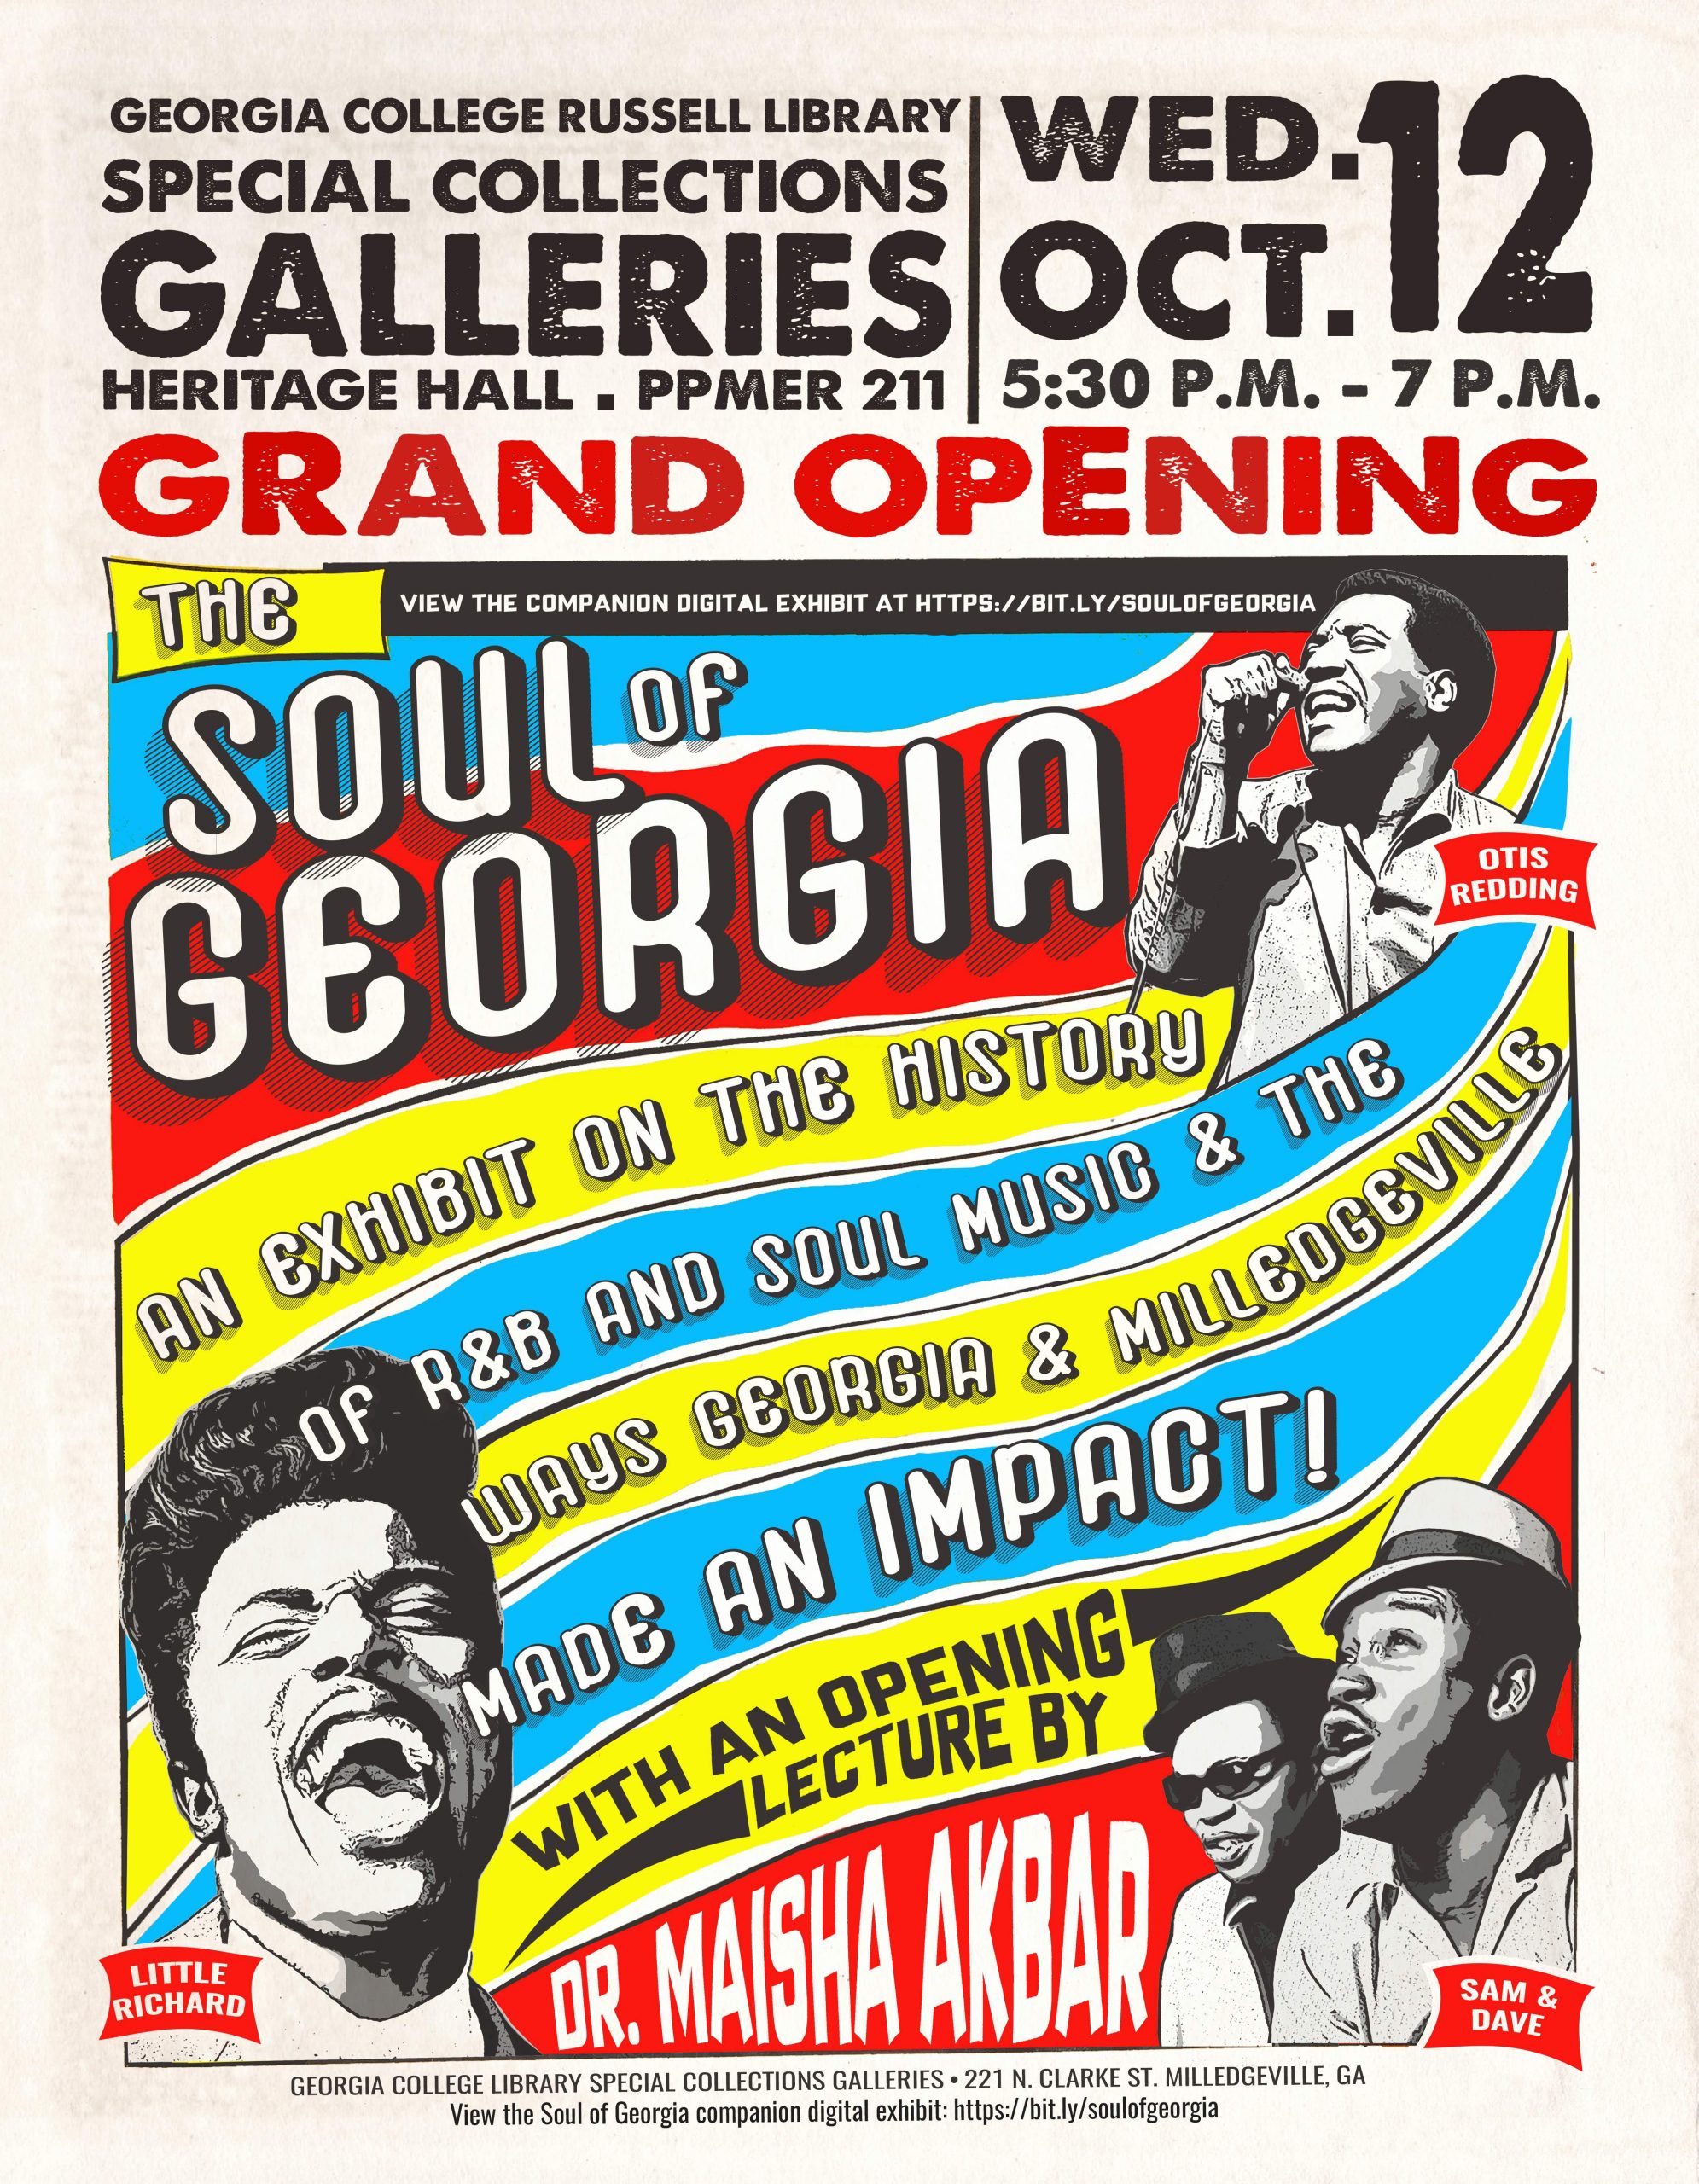 “The Soul of Georgia” Grand Opening